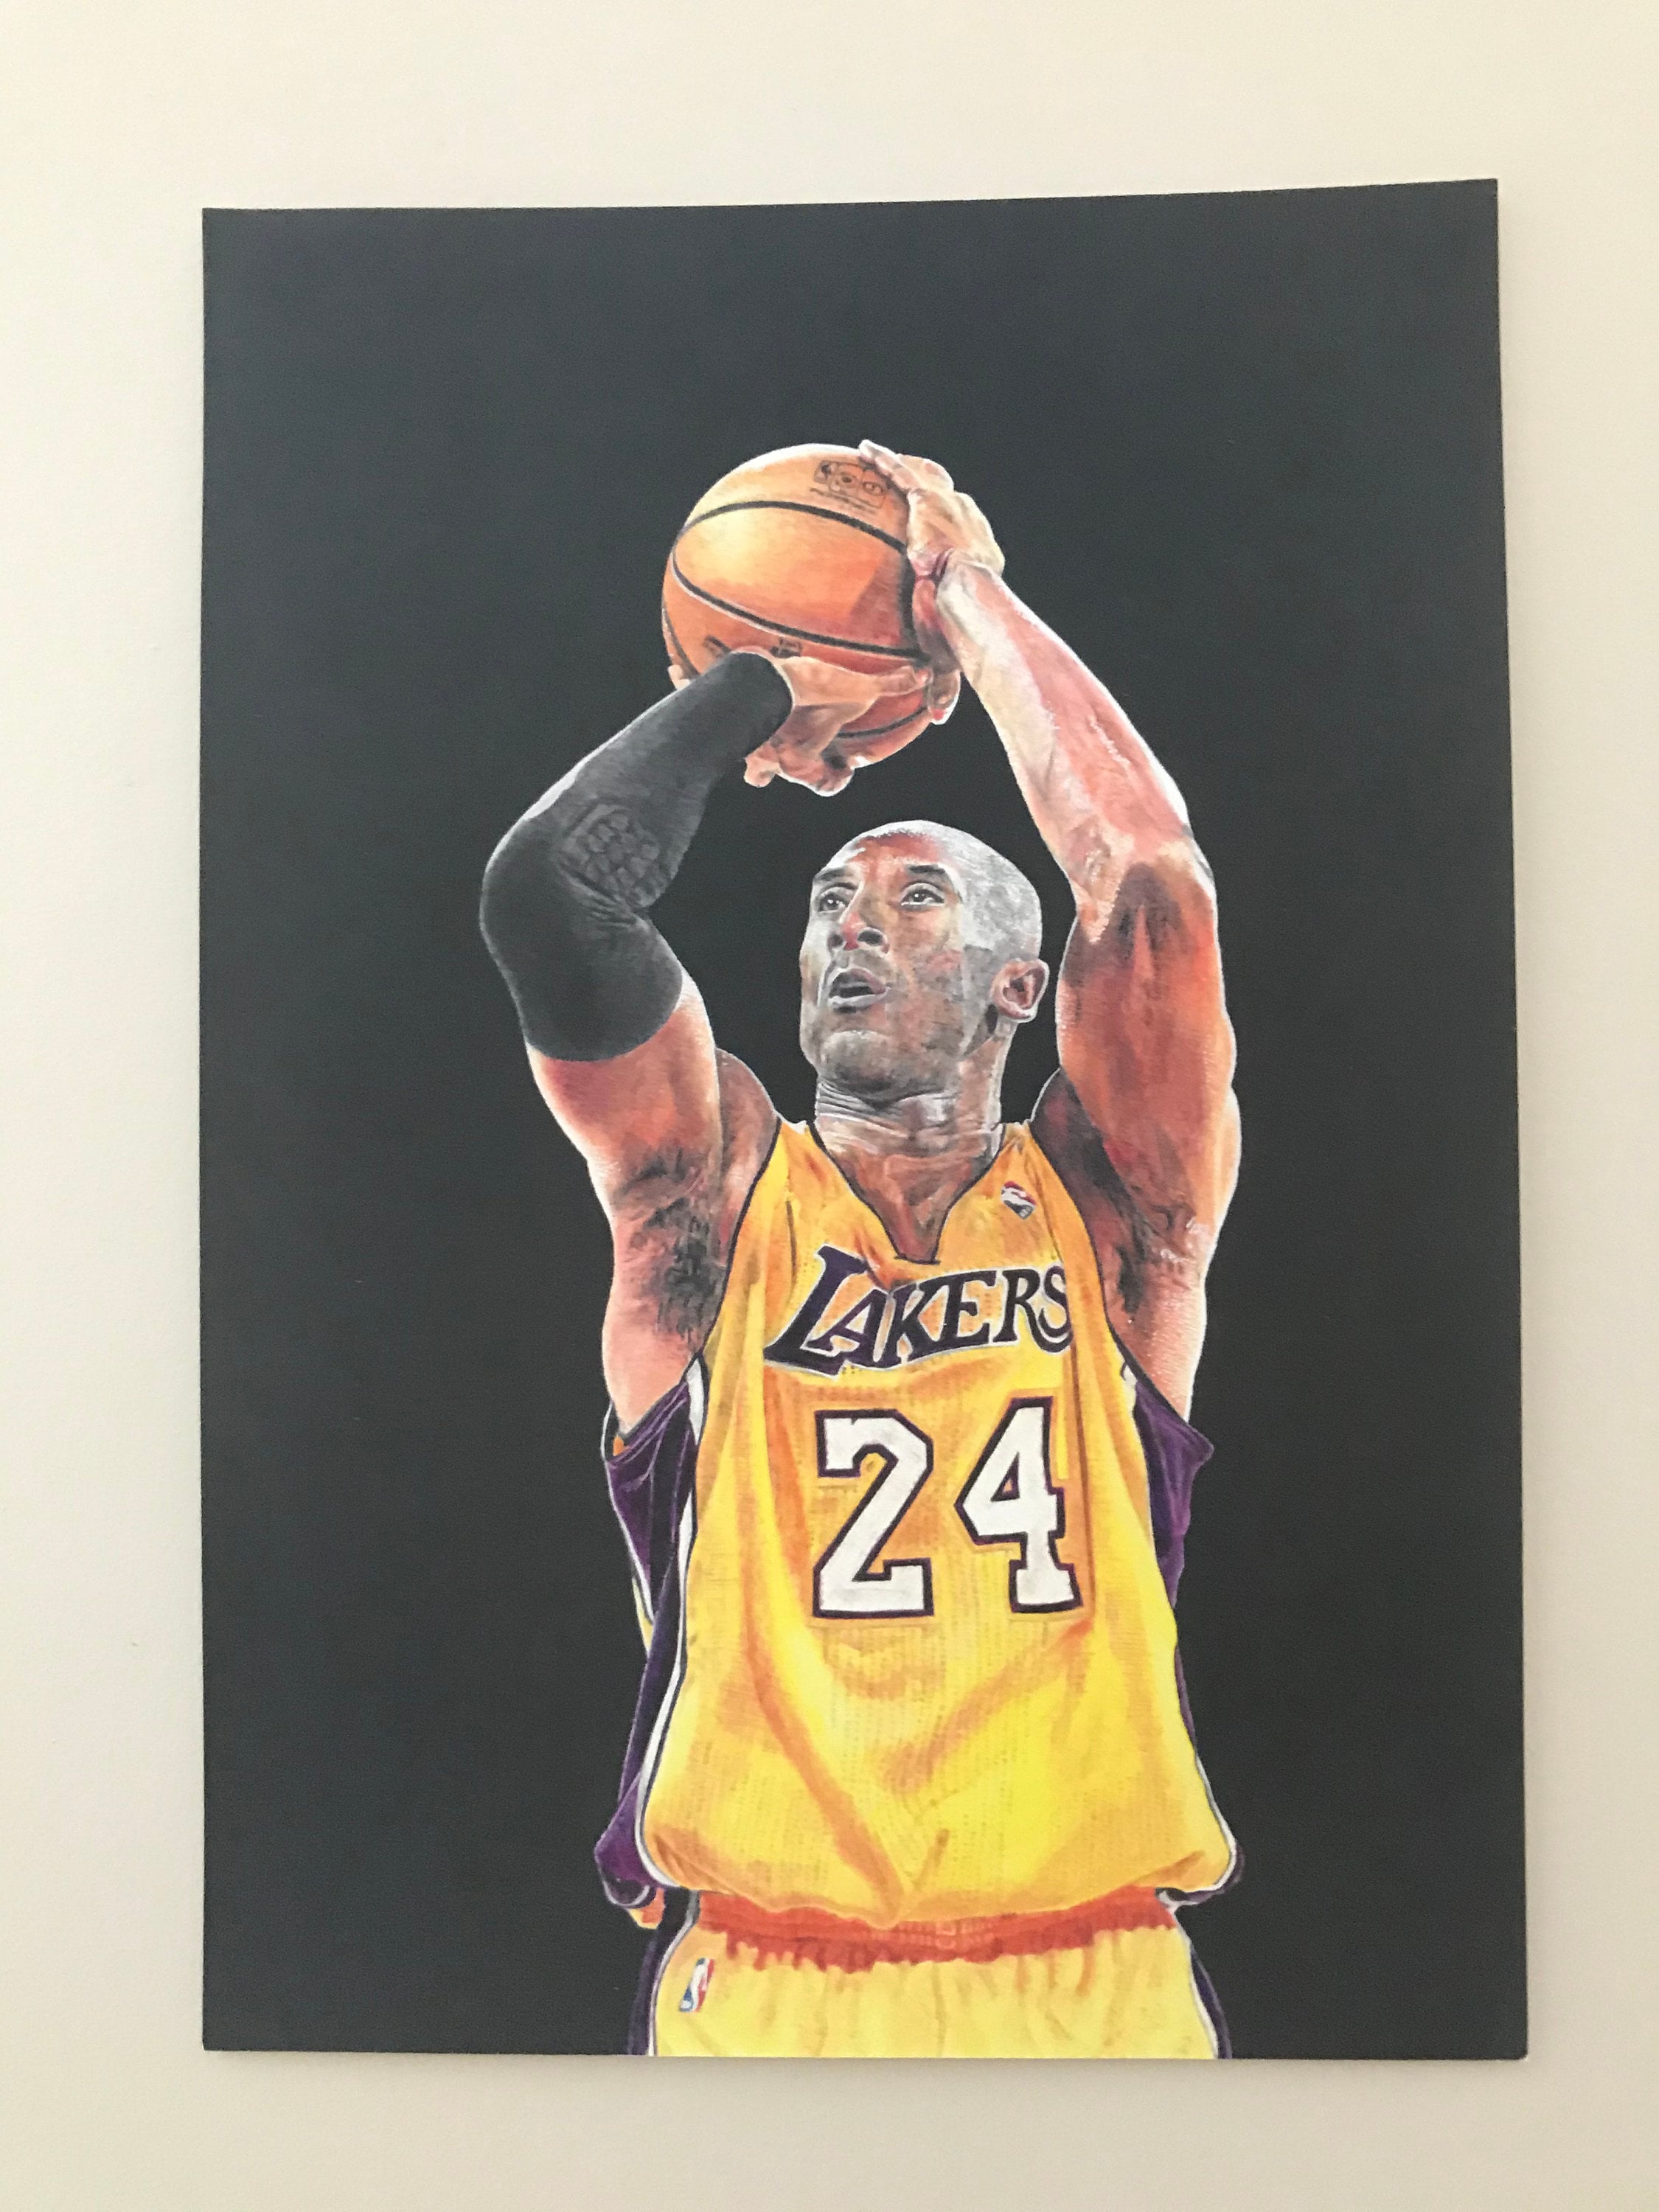 Painted jersey of Kobe Bryant mid-dunk during the 2001 NBA Finals